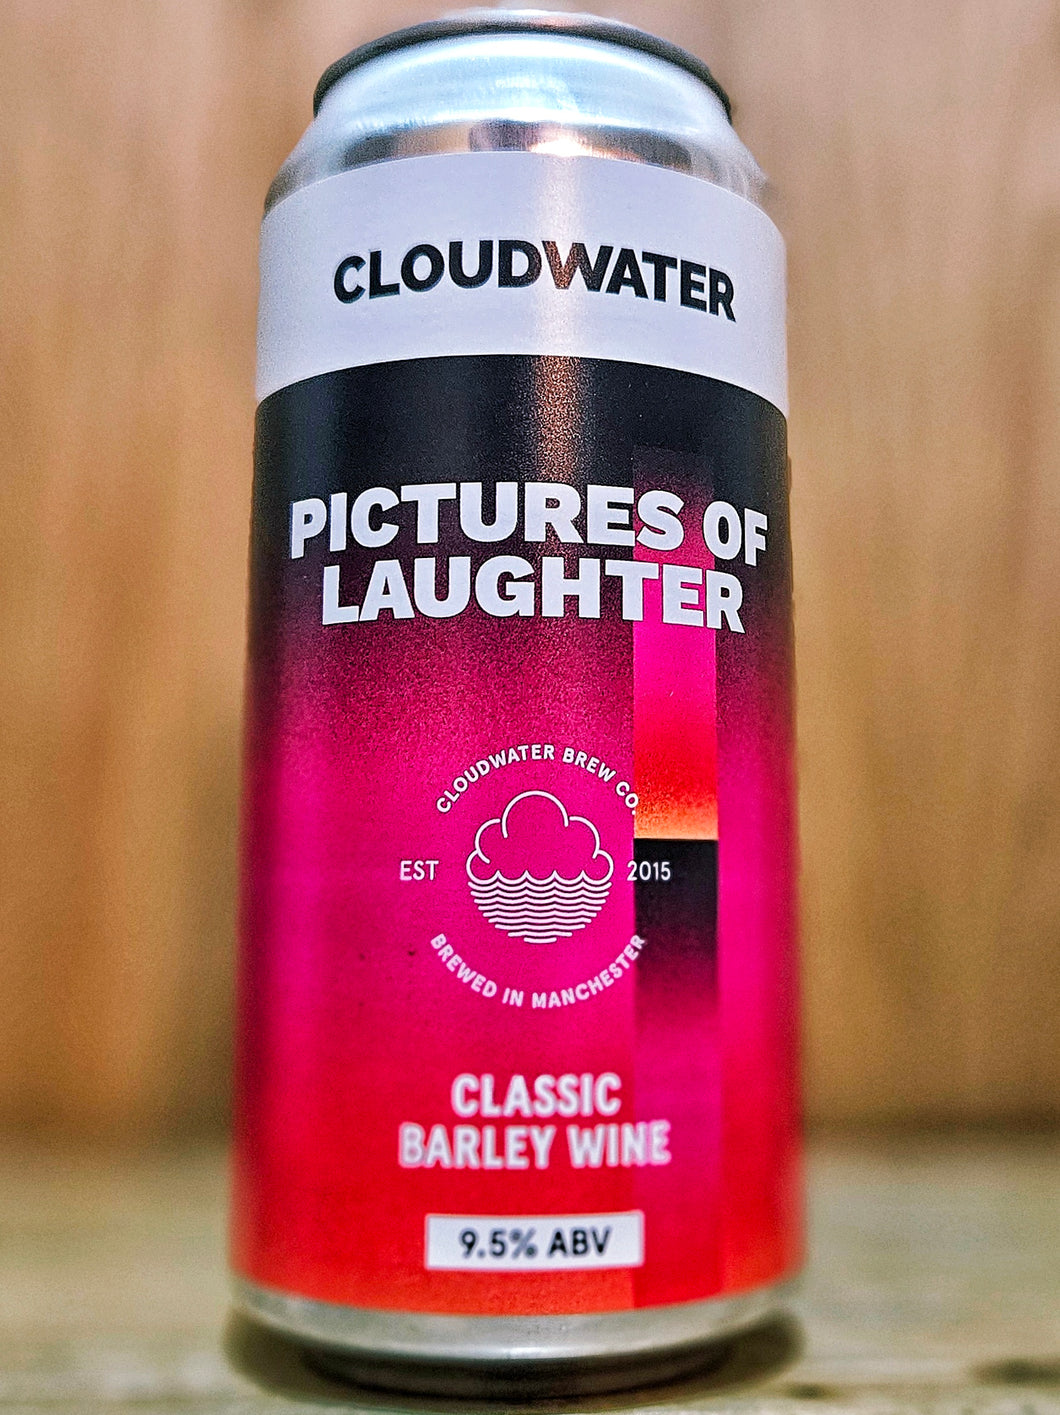 Cloudwater - Pictures Of Laughter